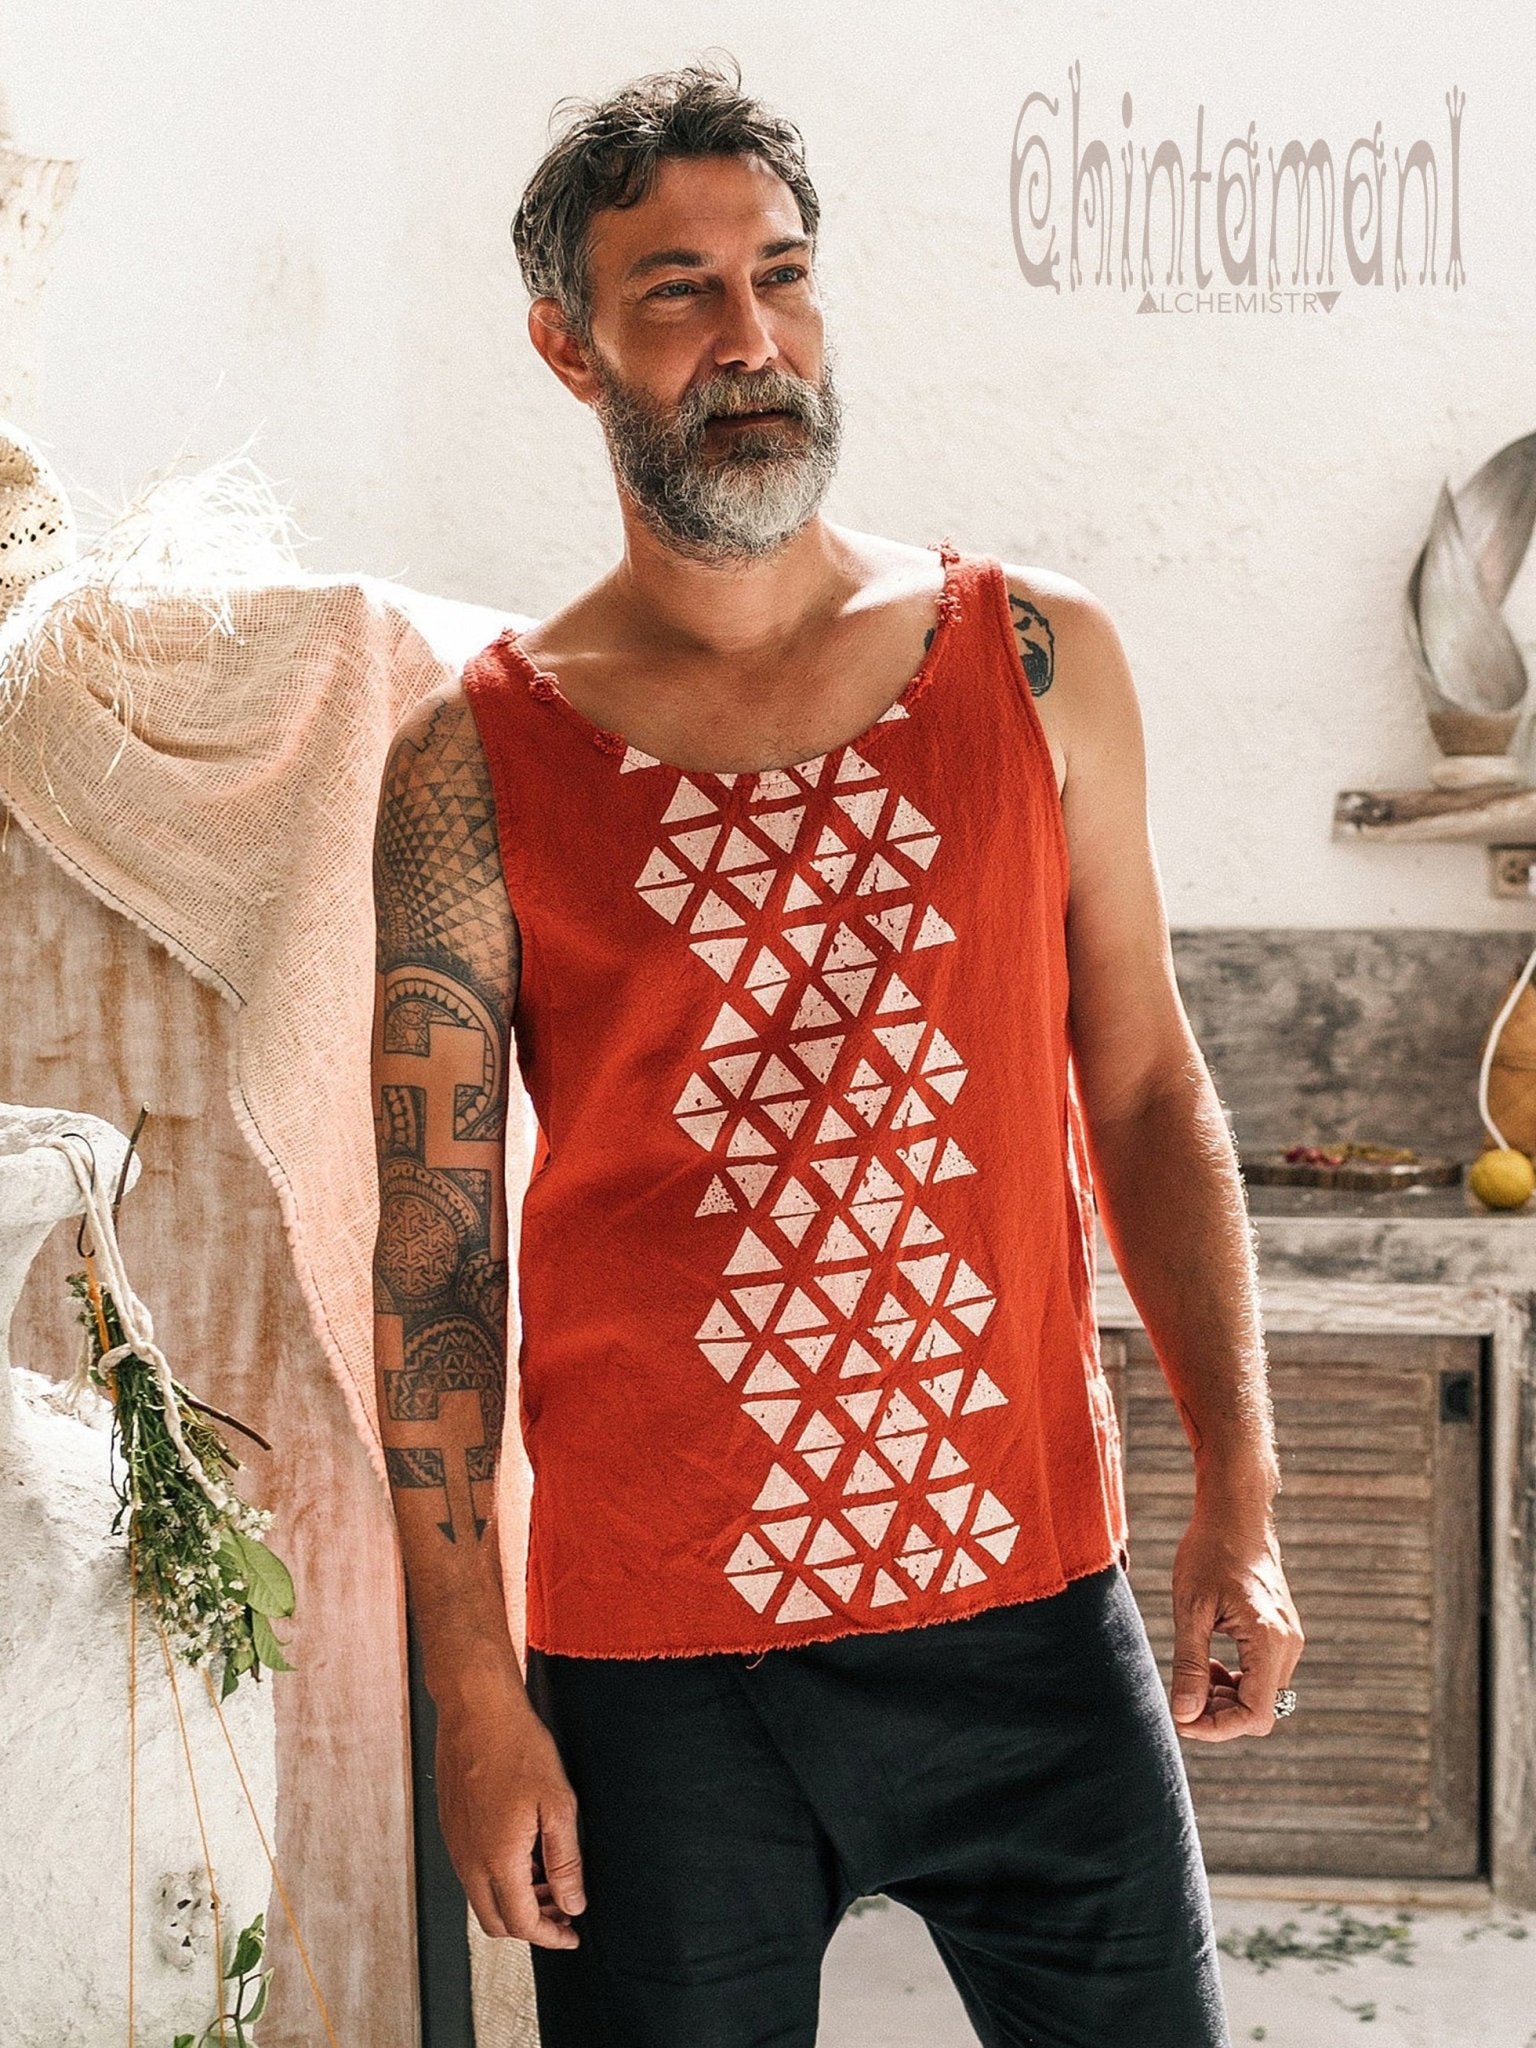 for Cotton Nomad Geometric / Men Red Top Tank Screen with Ochre Print – ChintamaniAlchemi